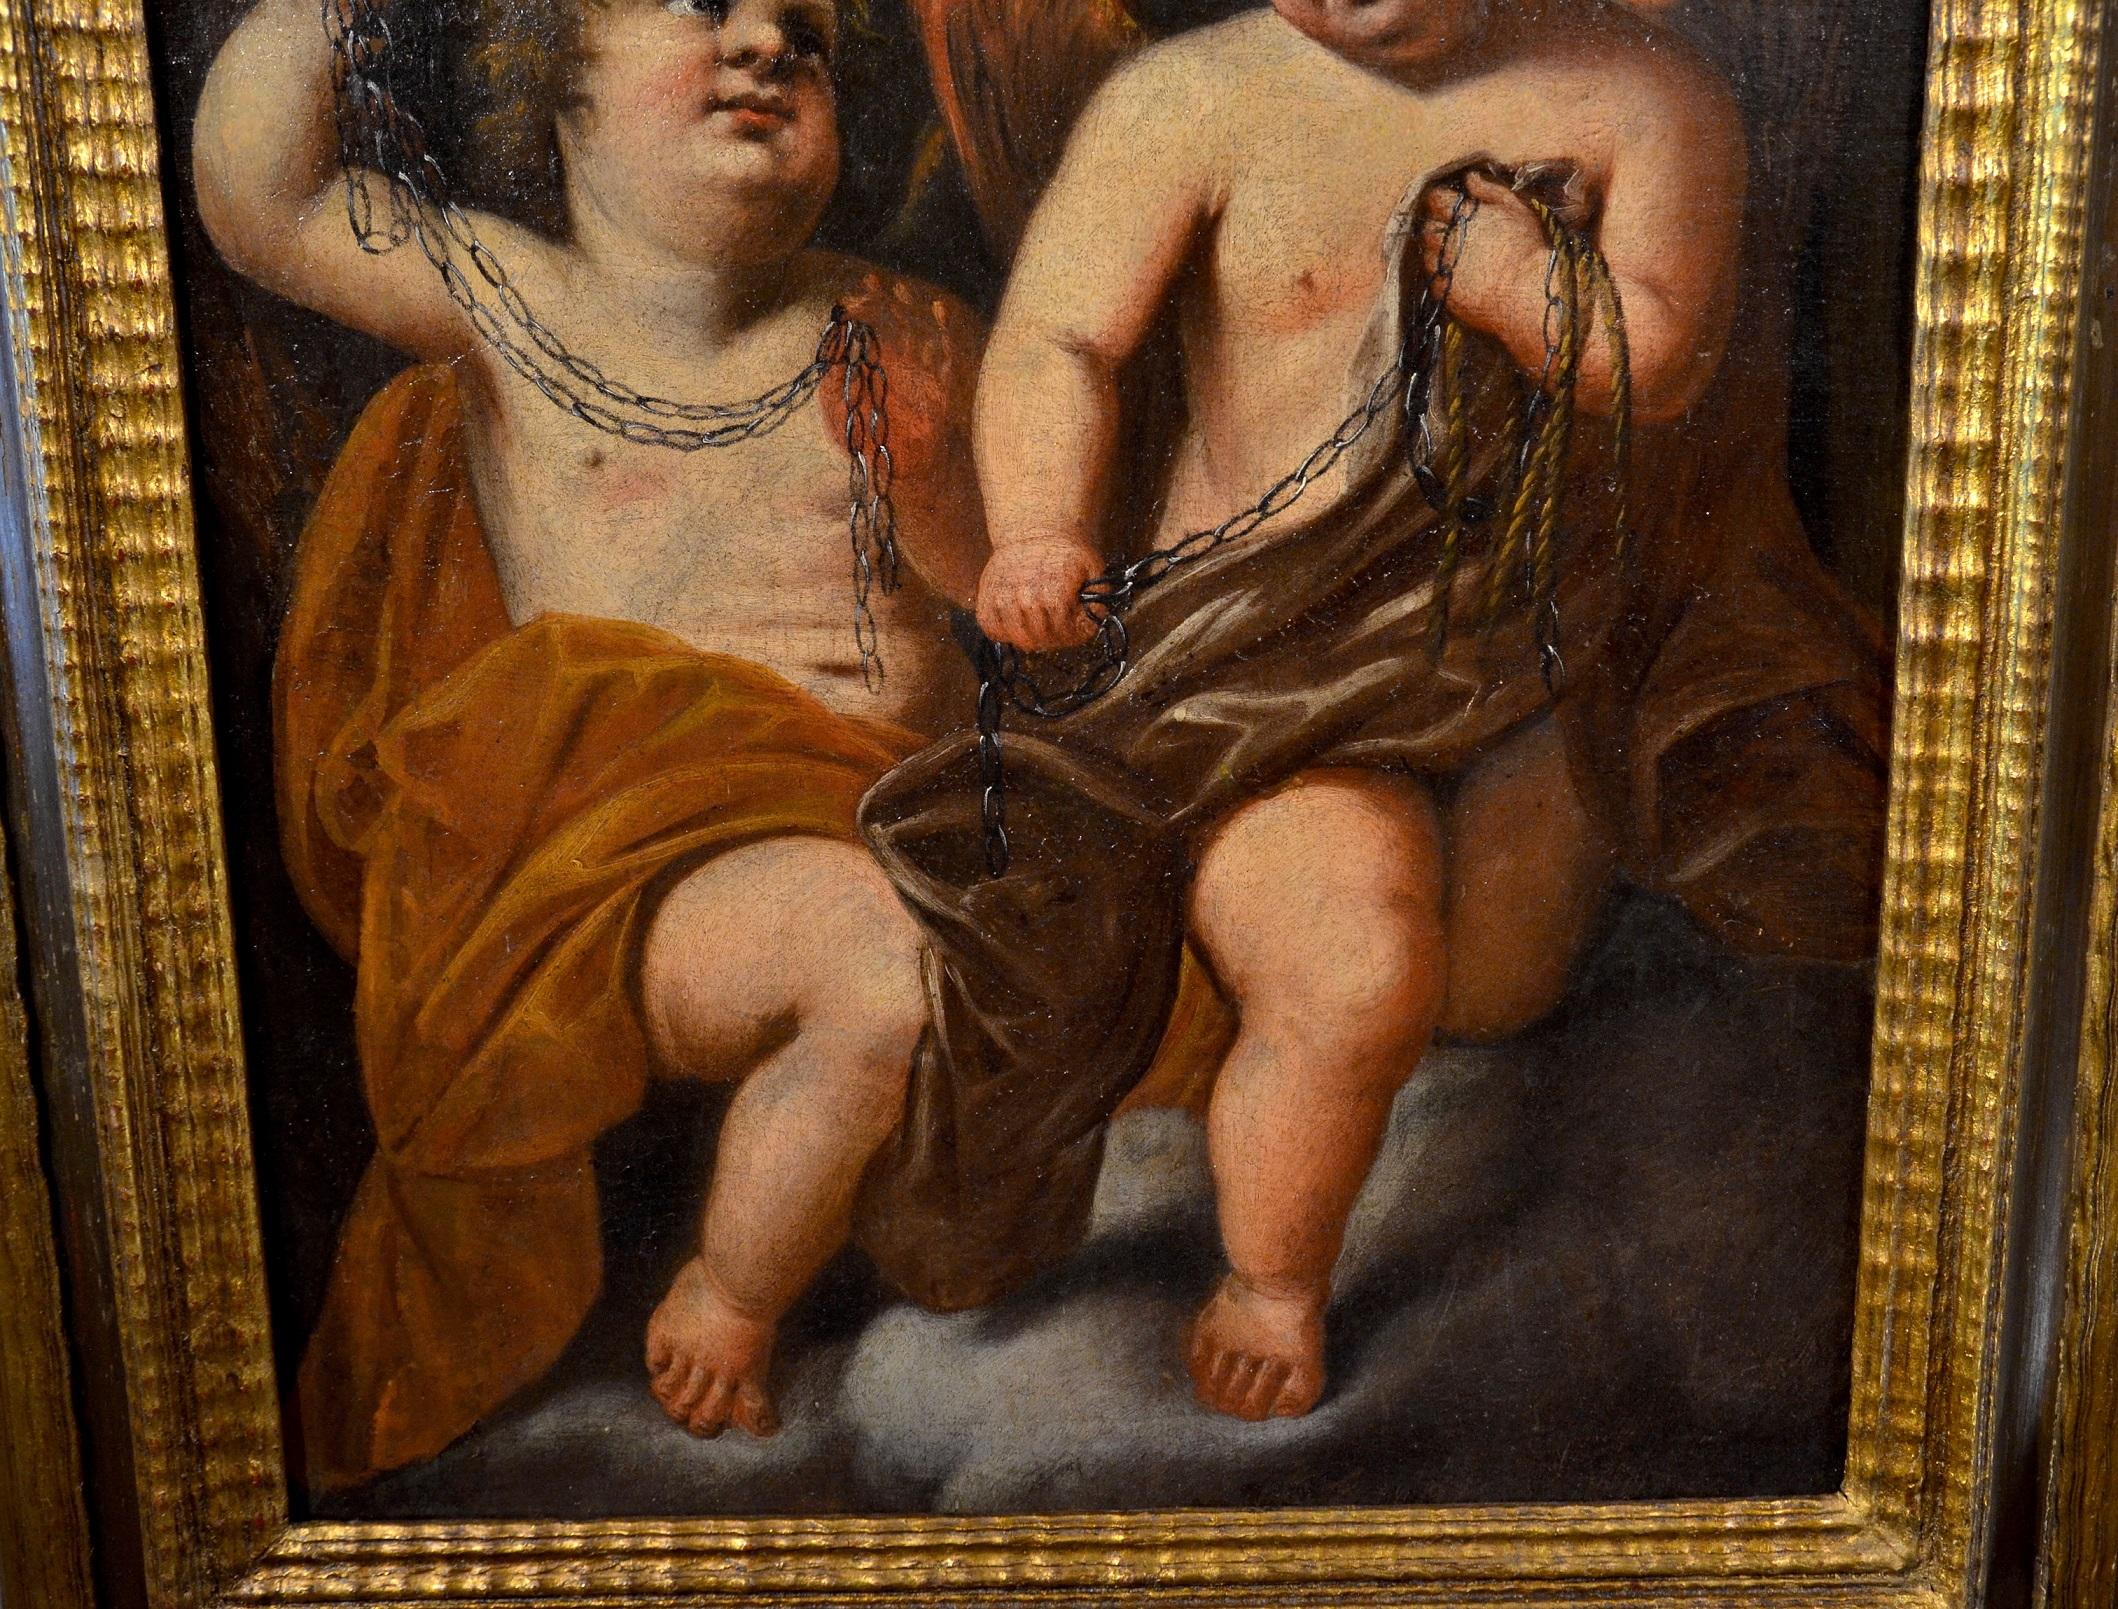 Attributed to Giovanni Battista Merano (Genoa 1632 - Piacenza 1698)
Pair of winged cherubs with chains

Genoese school, around 1670-80
Oil on canvas, 67 x 57 cm.
Framed 89 x 78 cm.

This pleasant painting, depicting a pair of winged cherubs, is